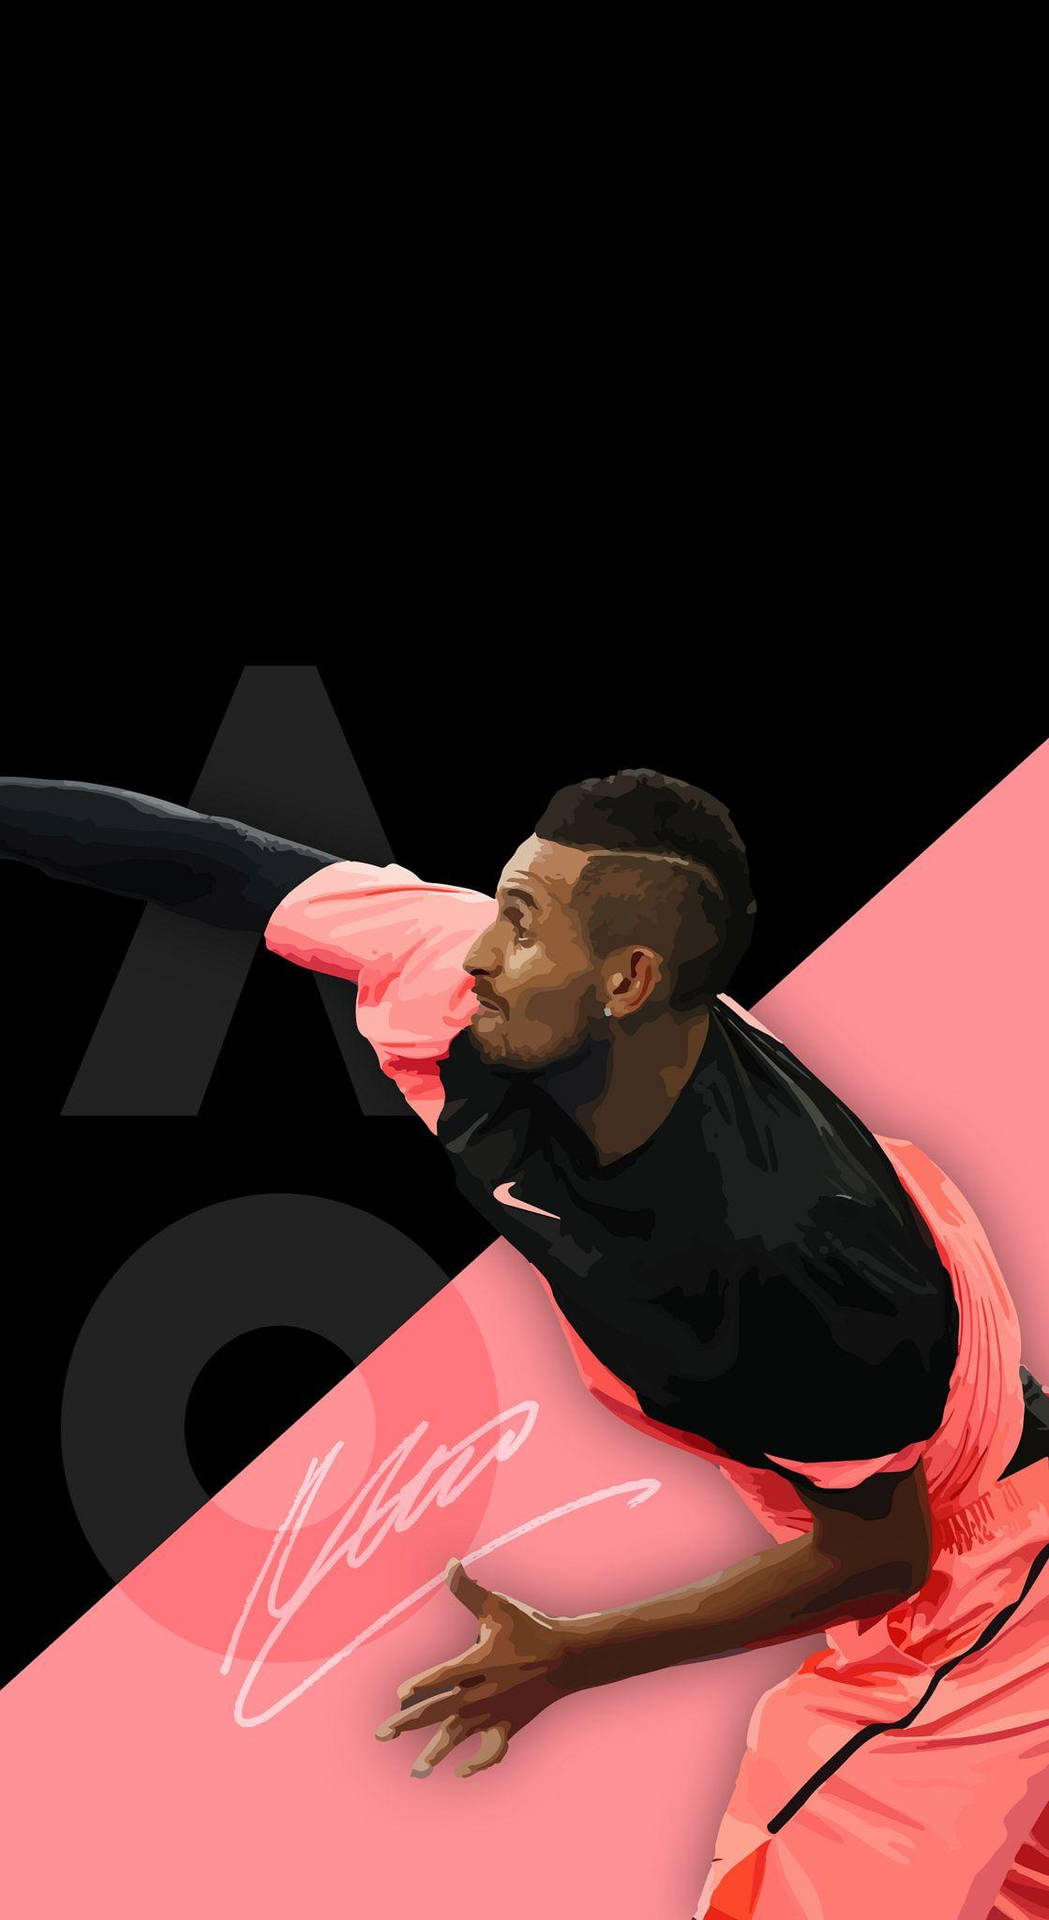 Tennis Player Nick Kyrgios Poster Background